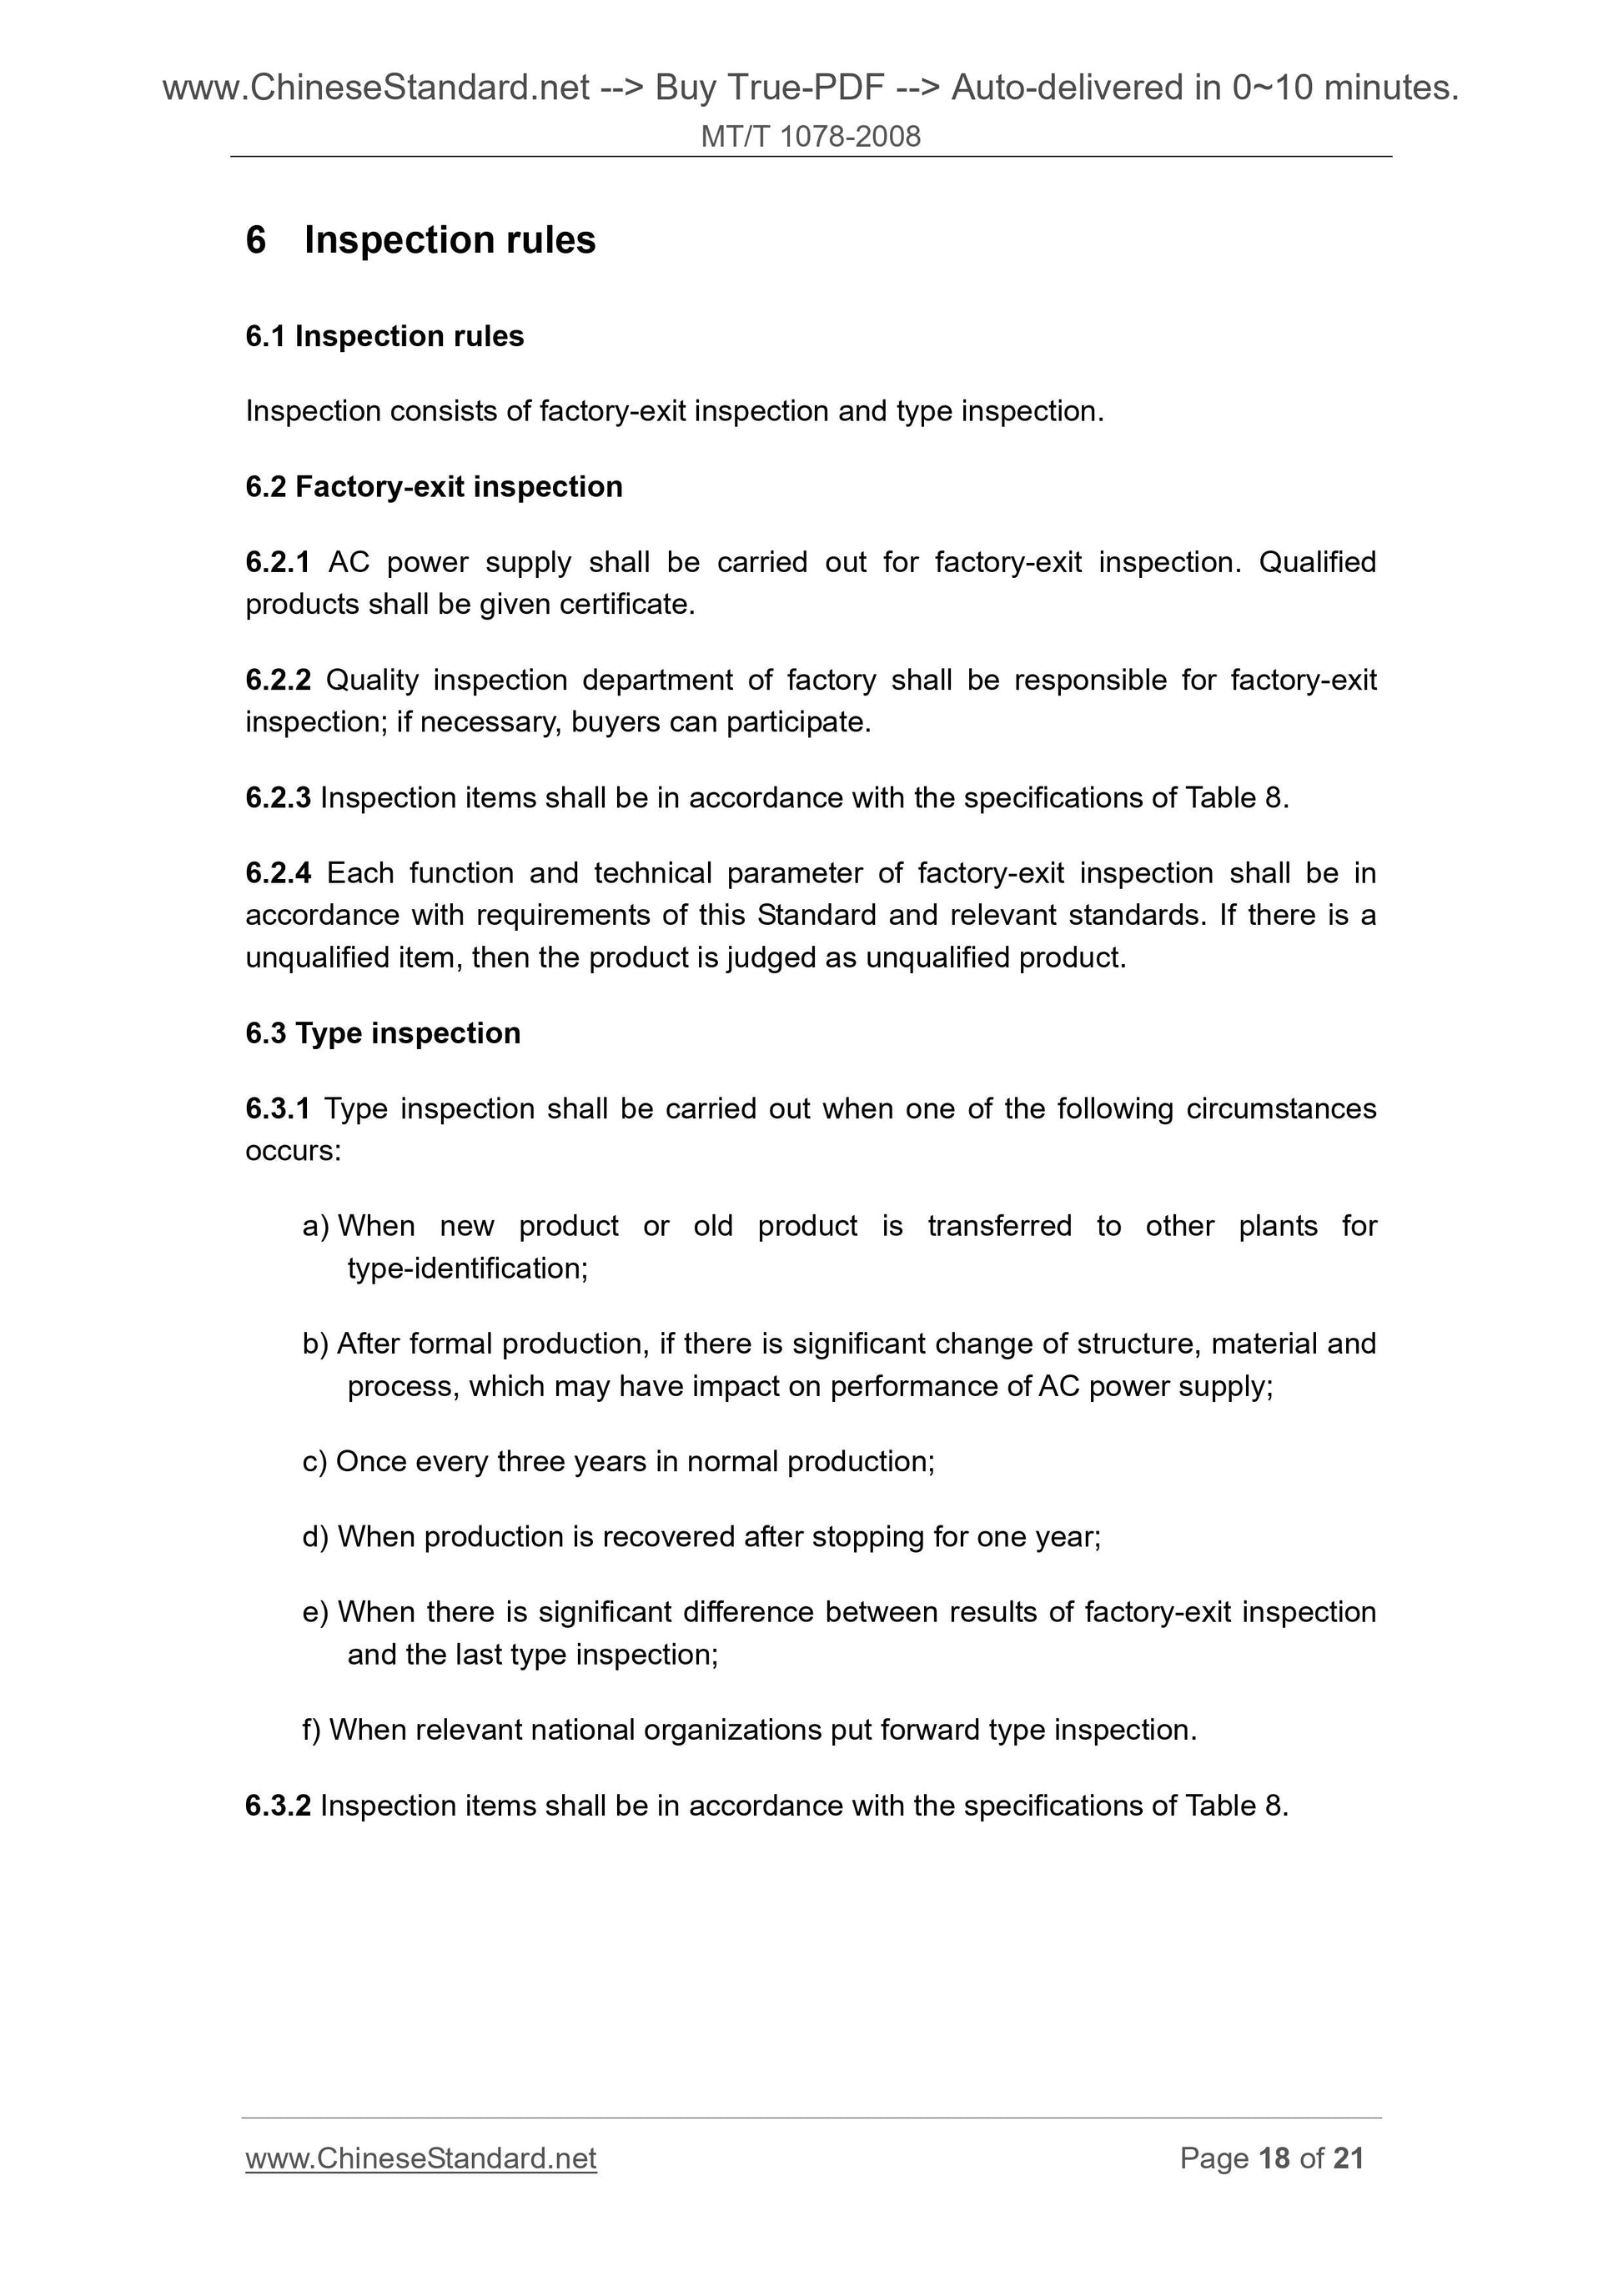 MT/T 1078-2008 Page 11